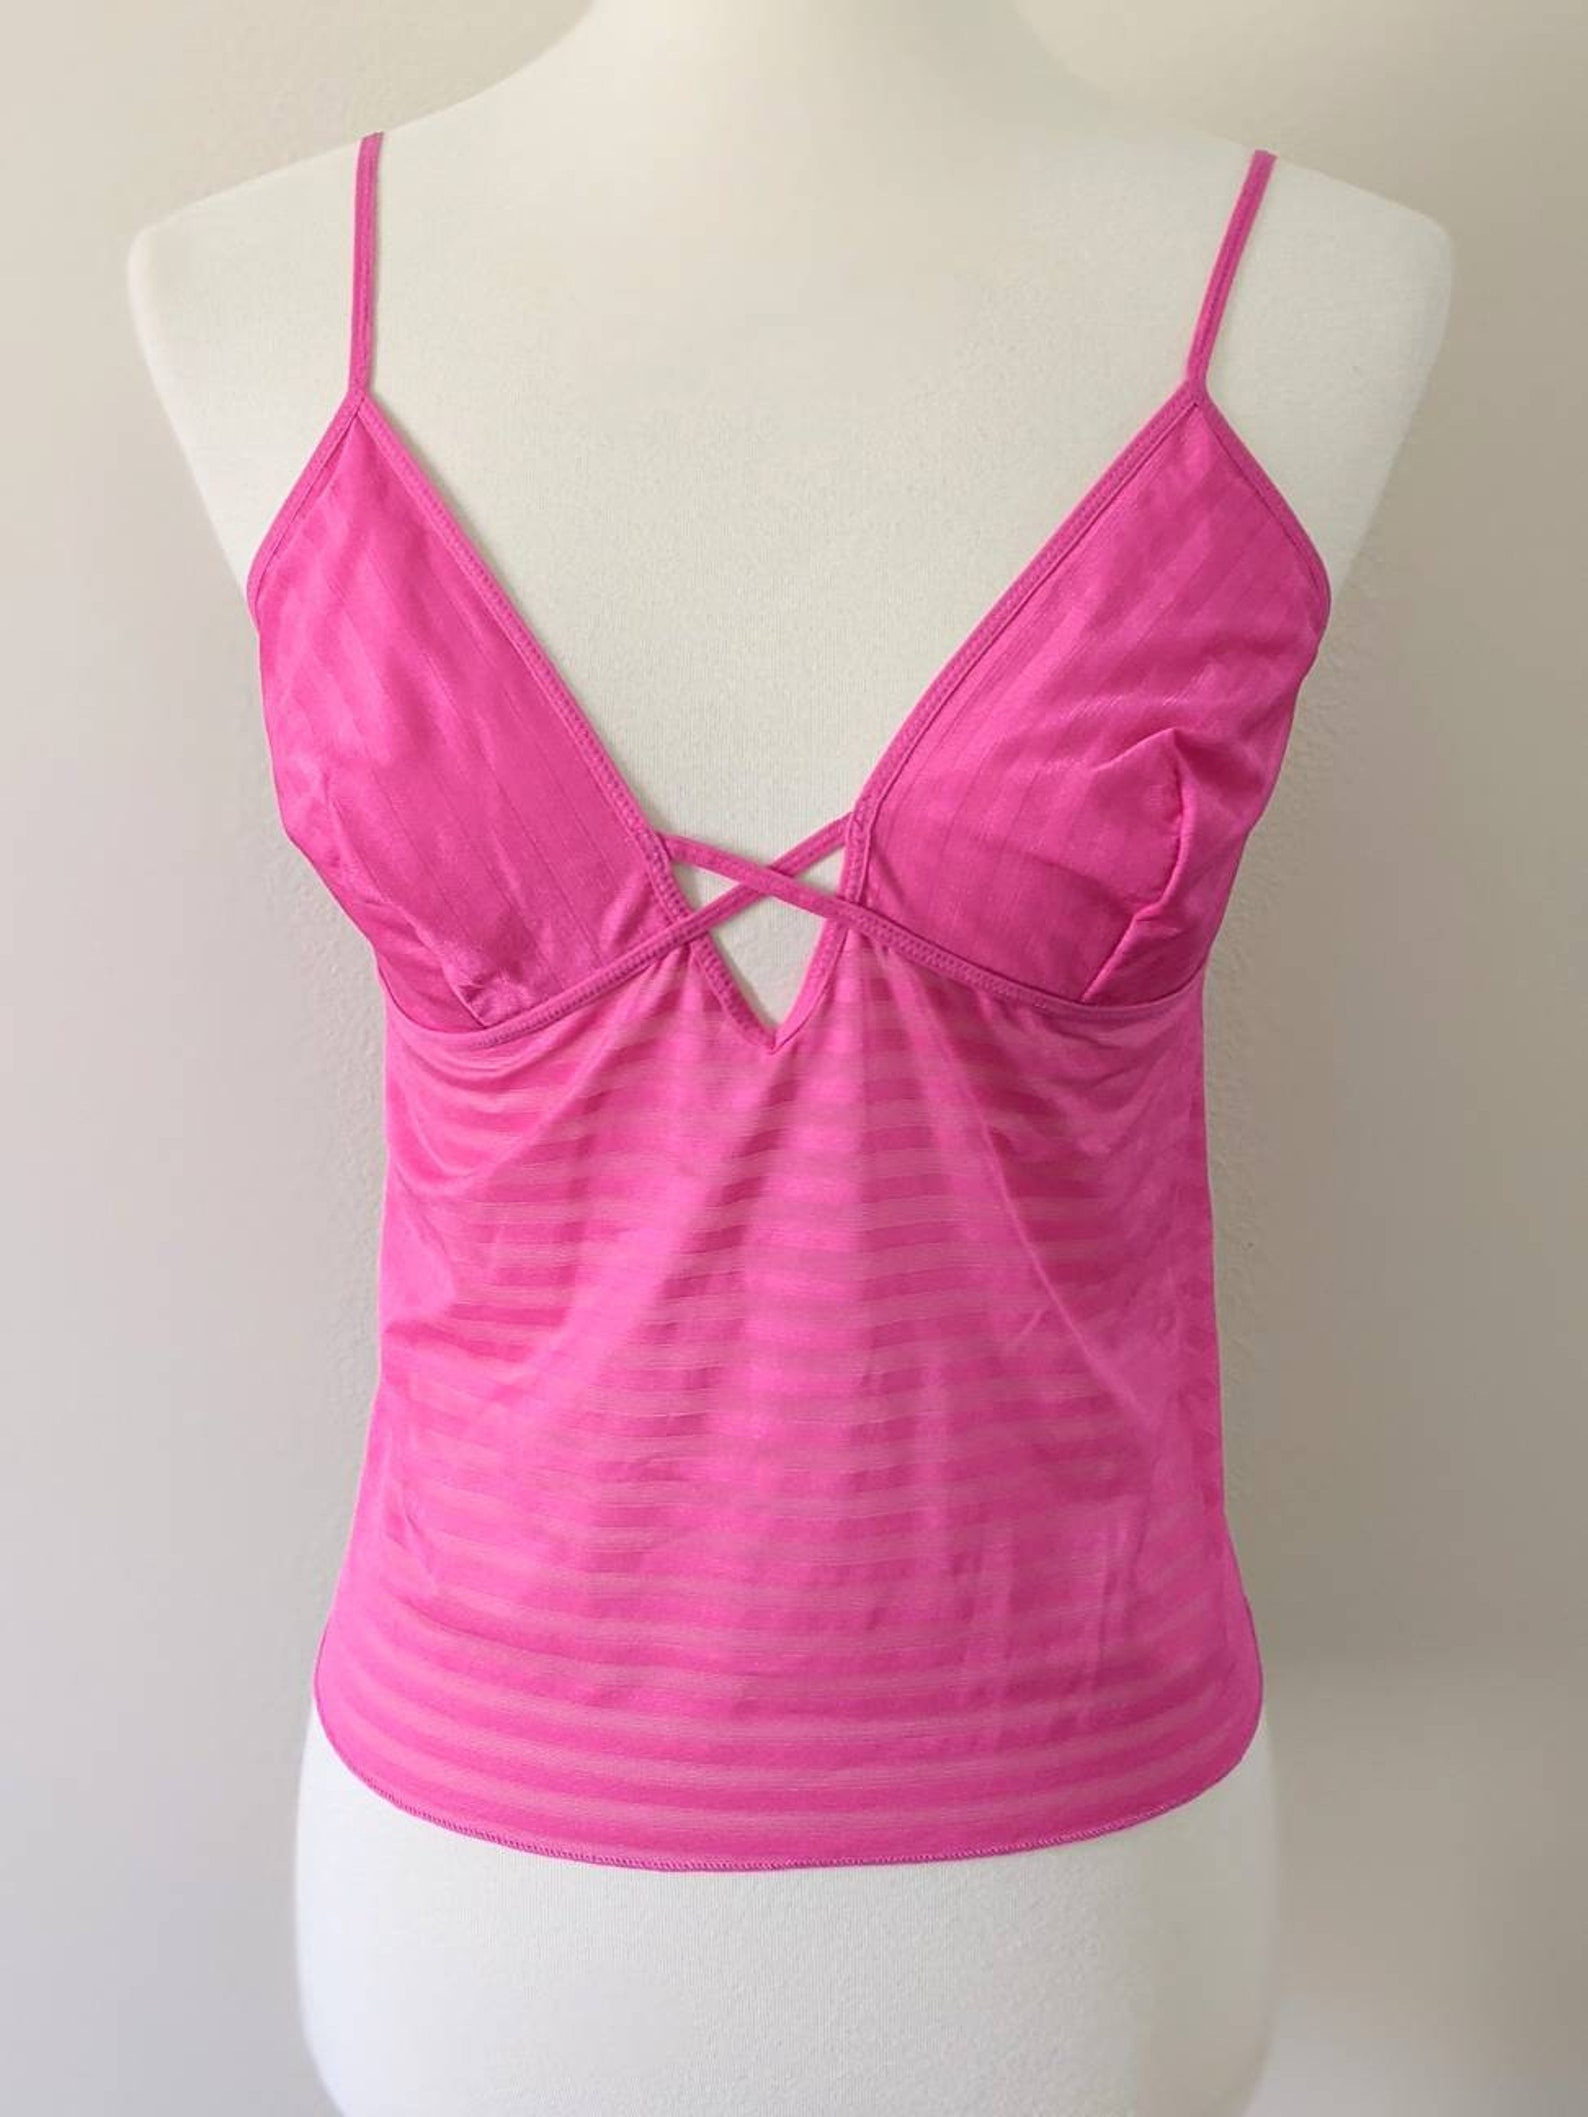 Pink Camisole Sheer Hot Pink Camisole Sheer Hot Pink Top | Etsy